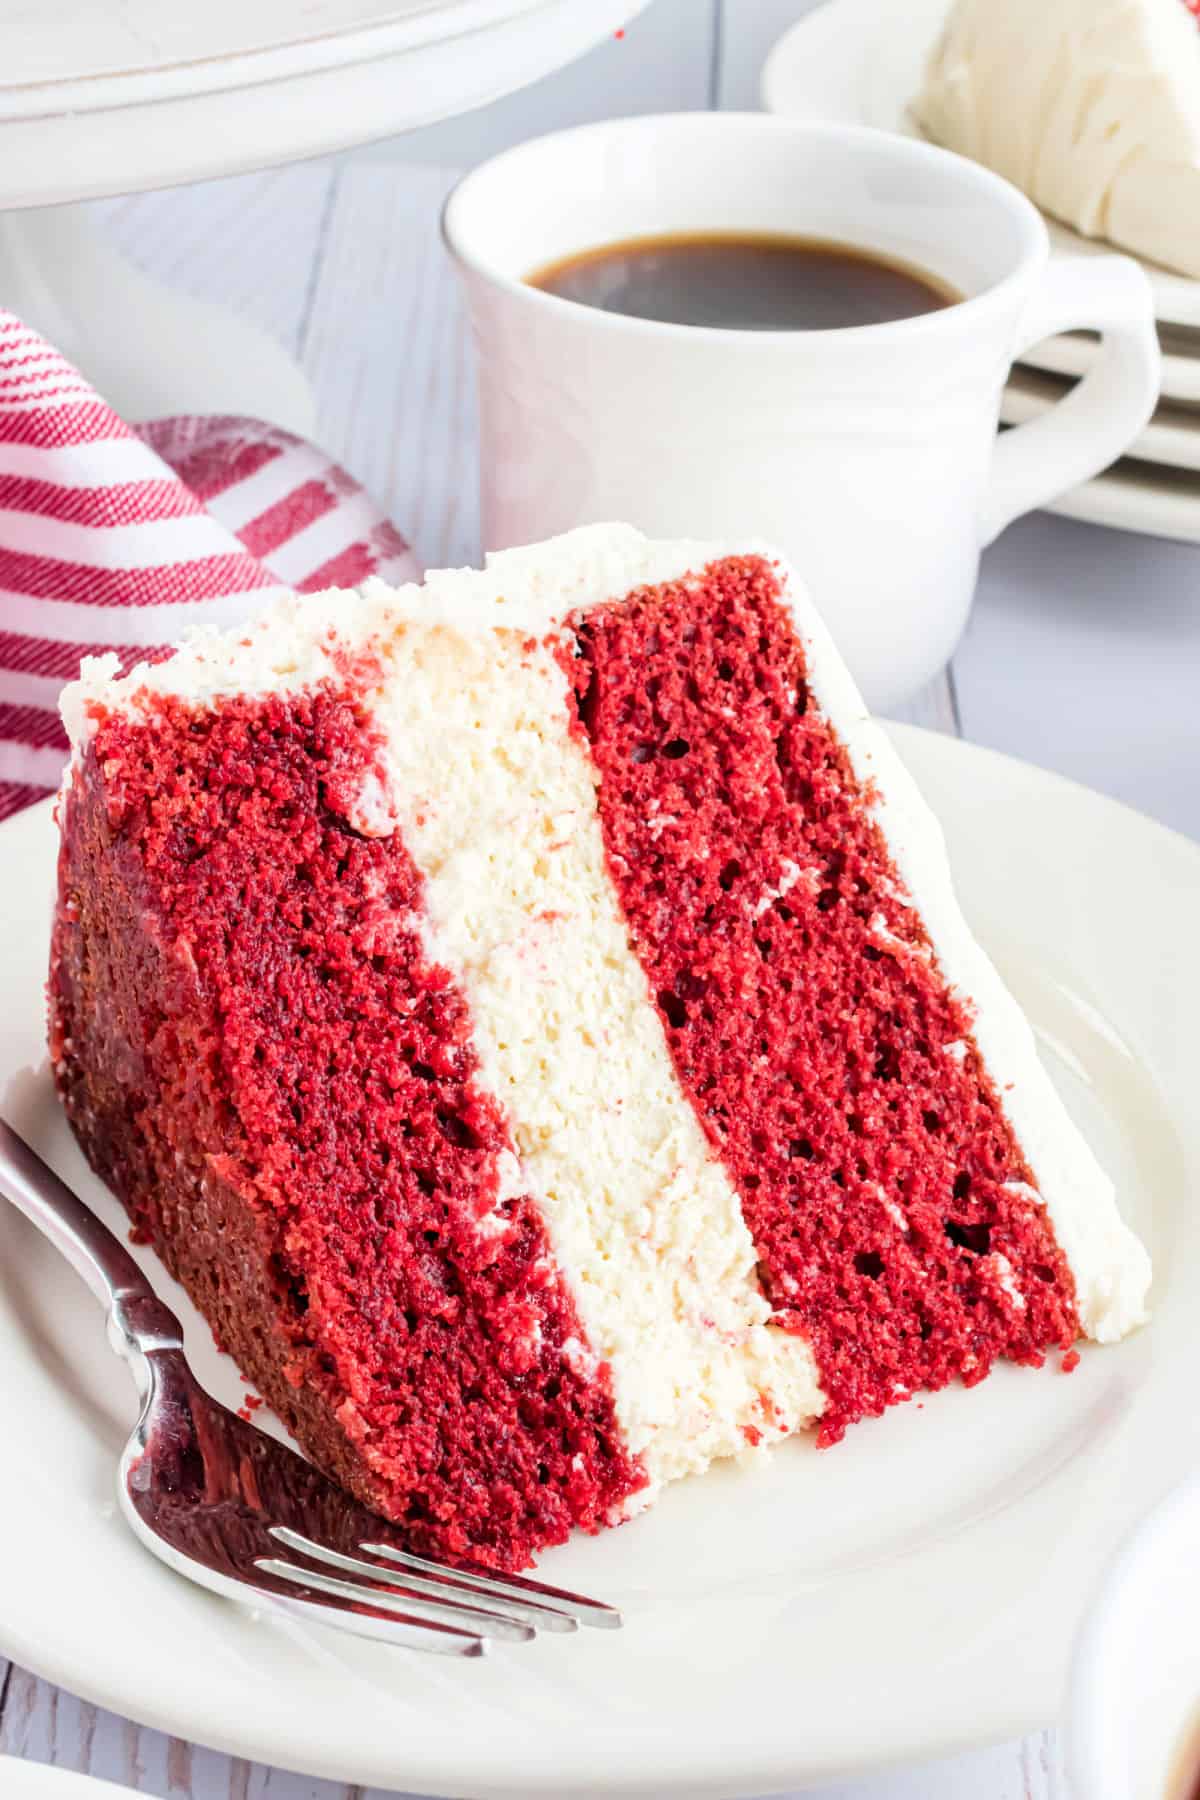 Slice of red velvet cake with cheesecake filling on a white plate.